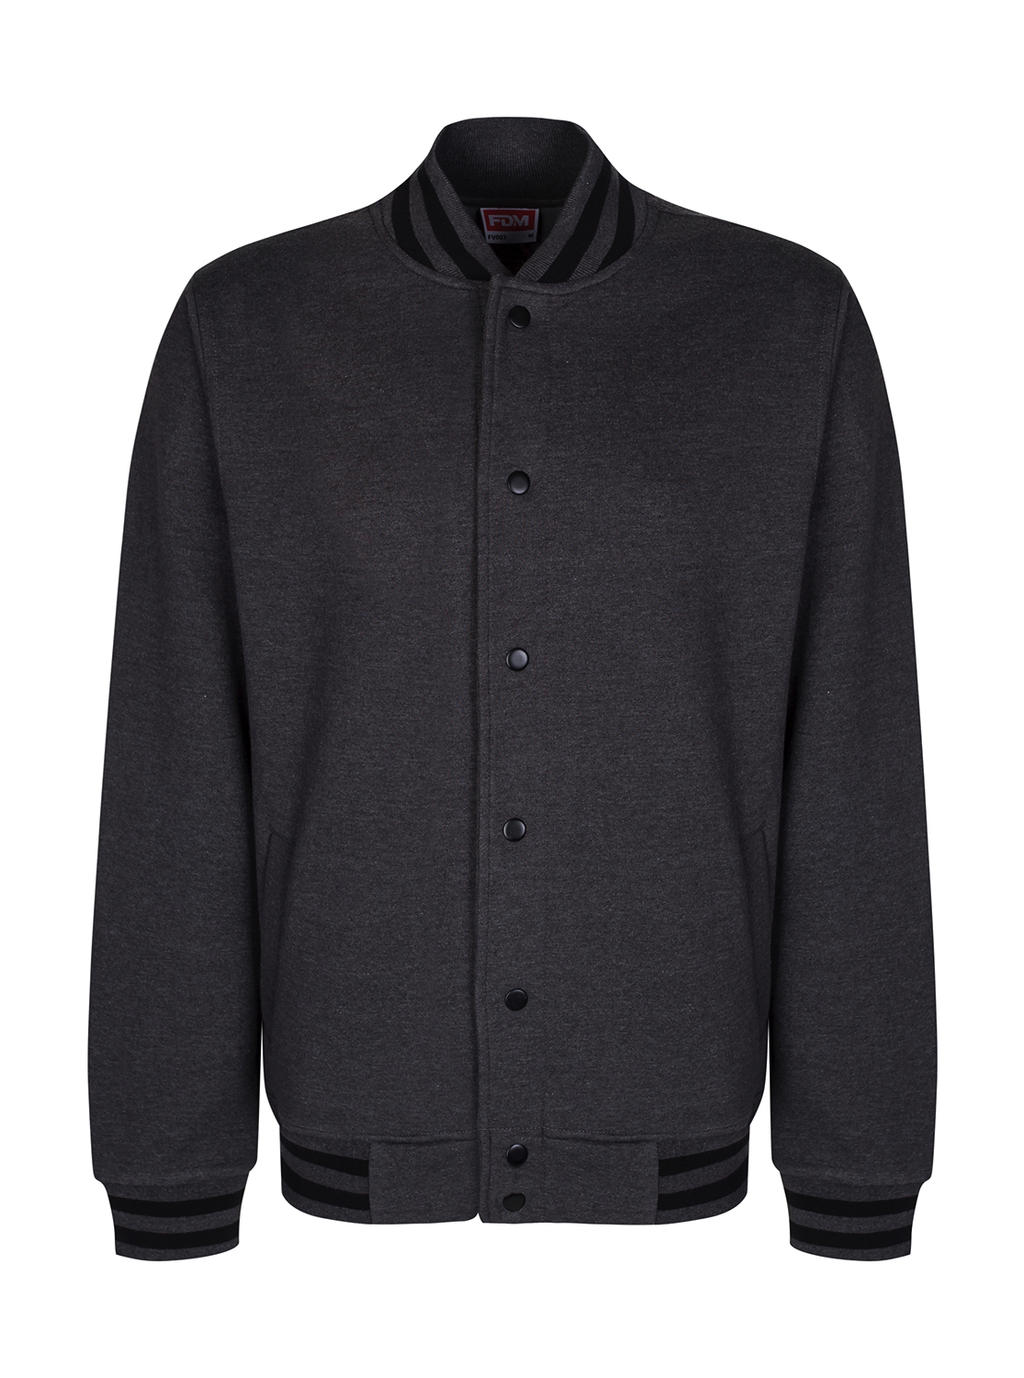  Campus Jacket in Farbe Charcoal/Black